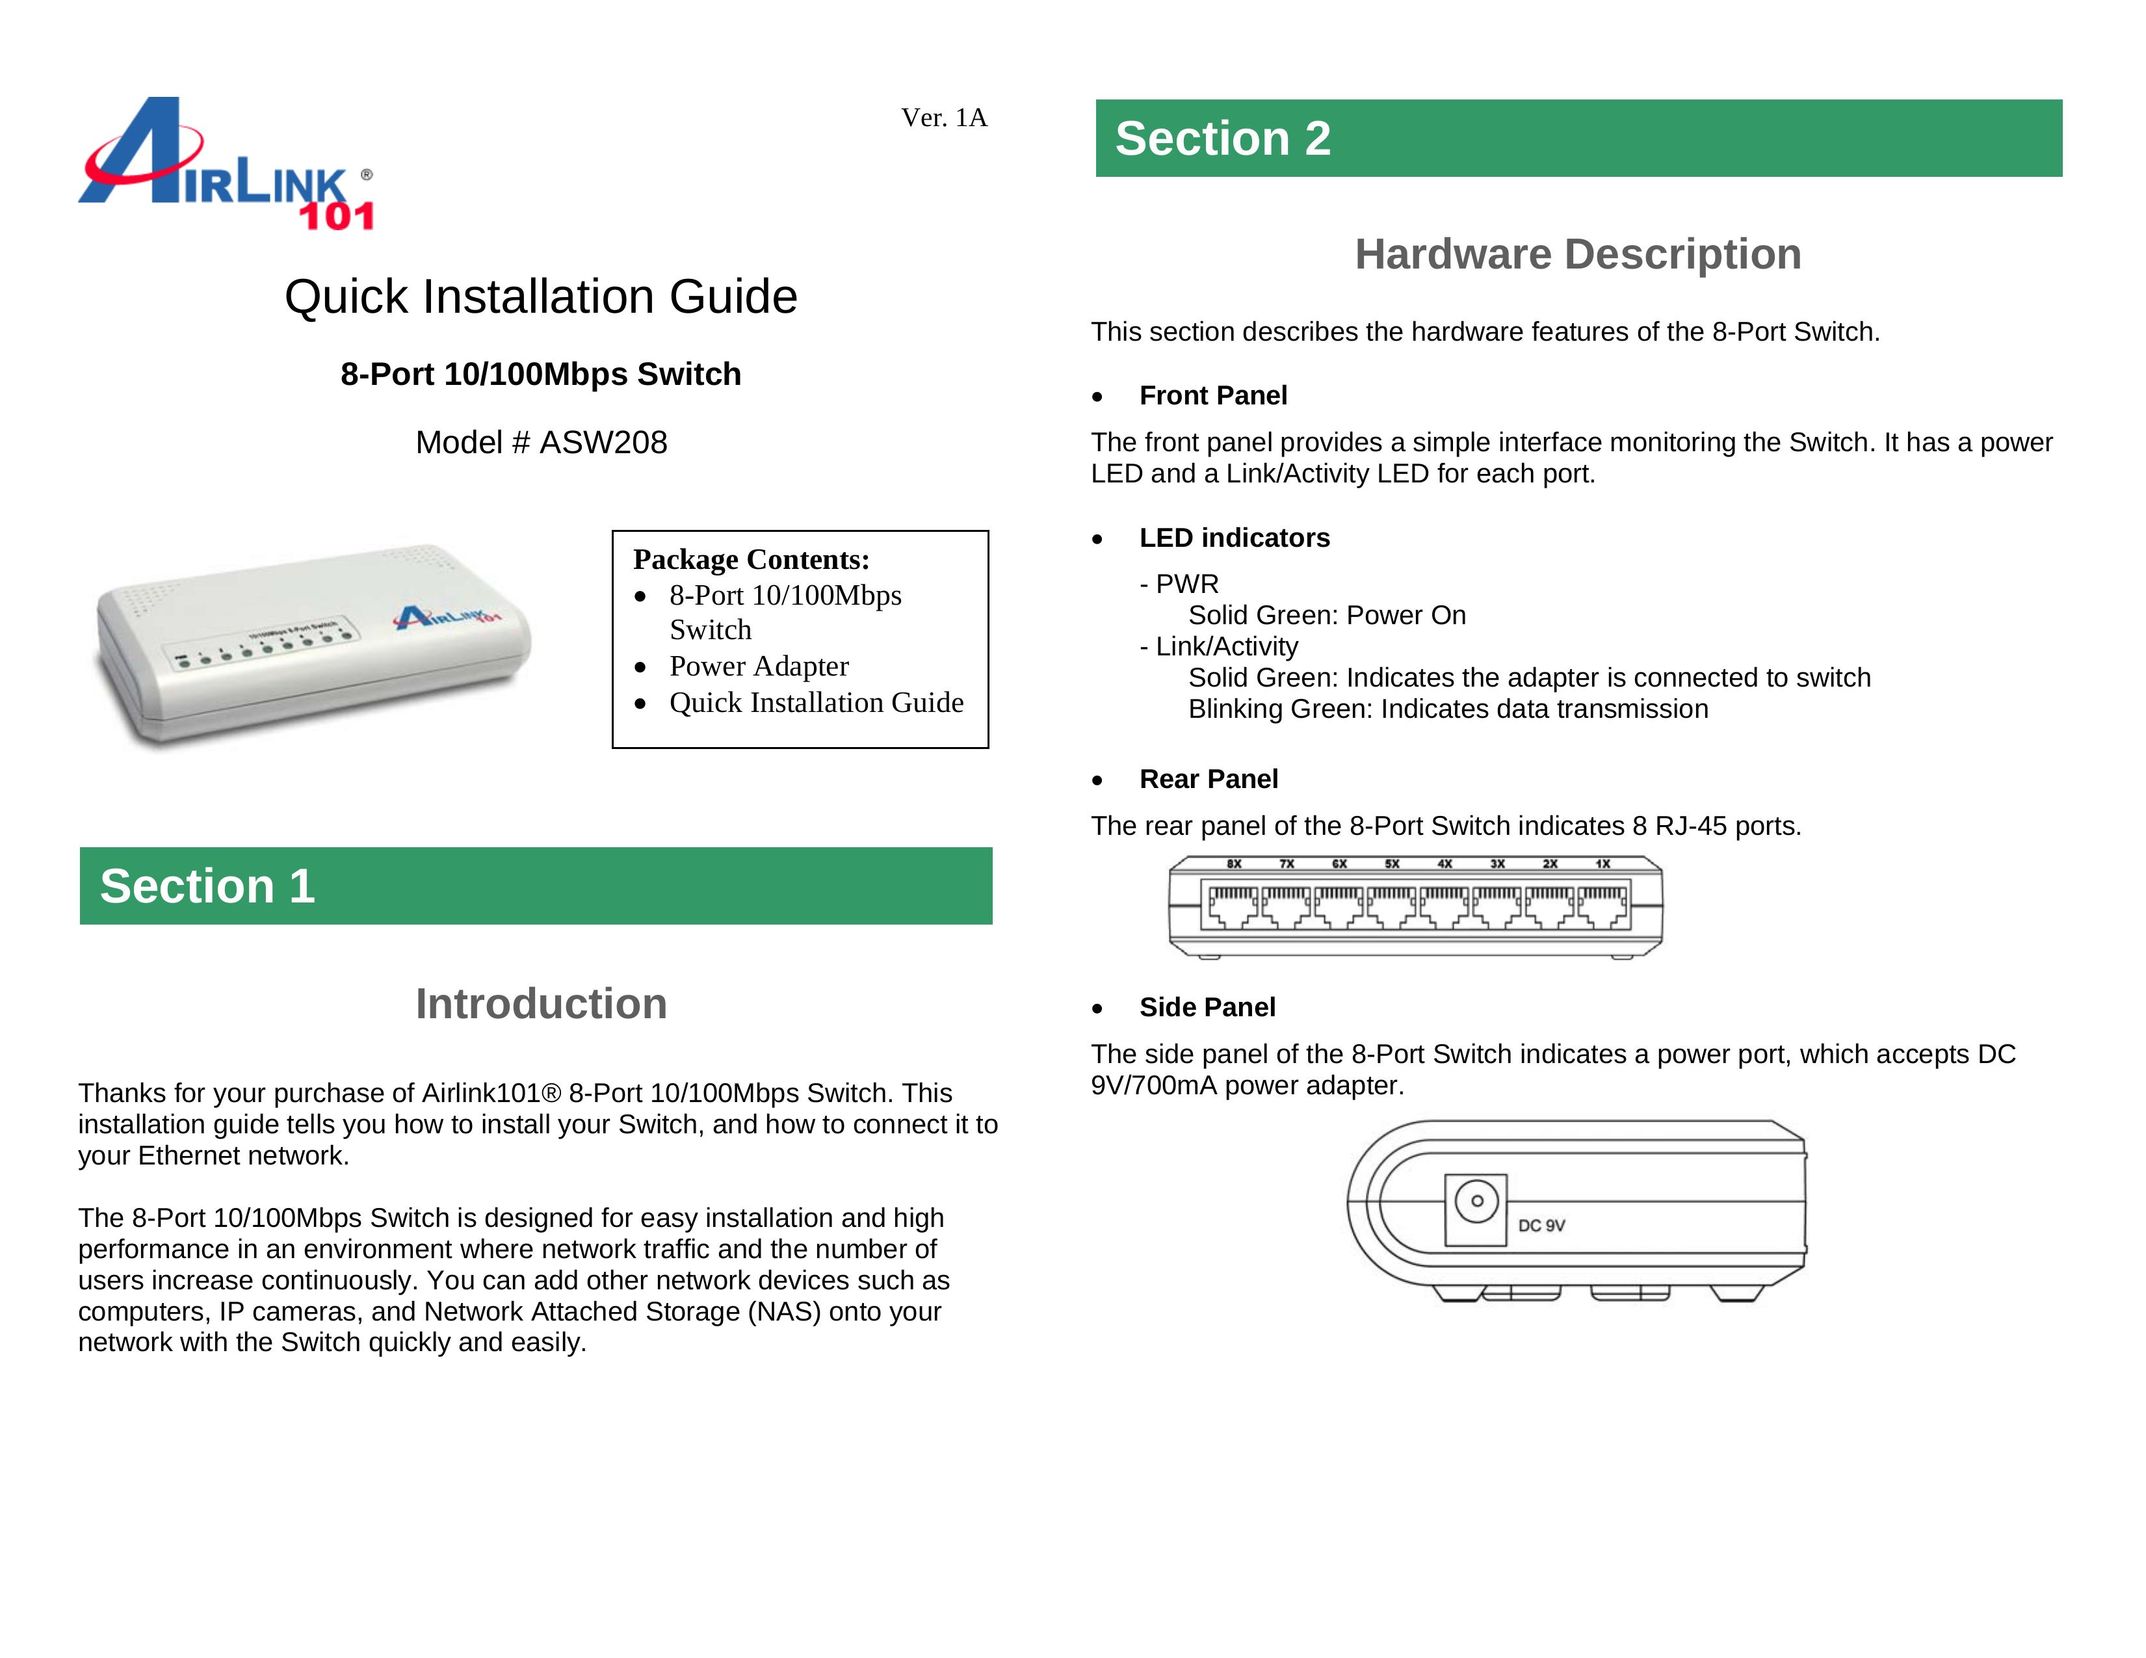 Airlink101 ASW208 Switch User Manual